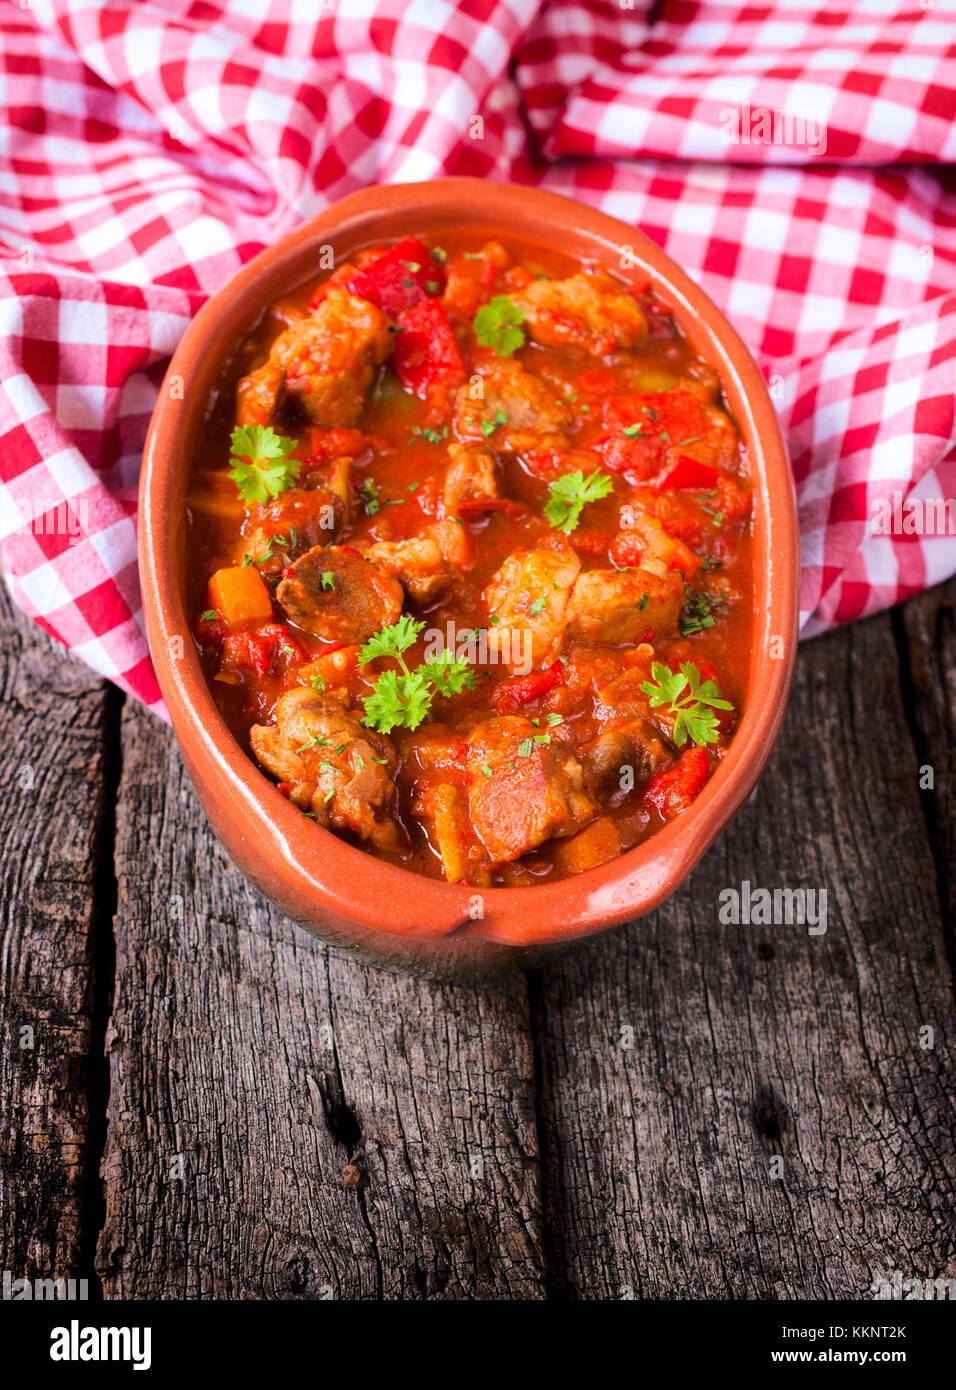 Portion of the beef gulash in bowl on wooden table Stock Photo